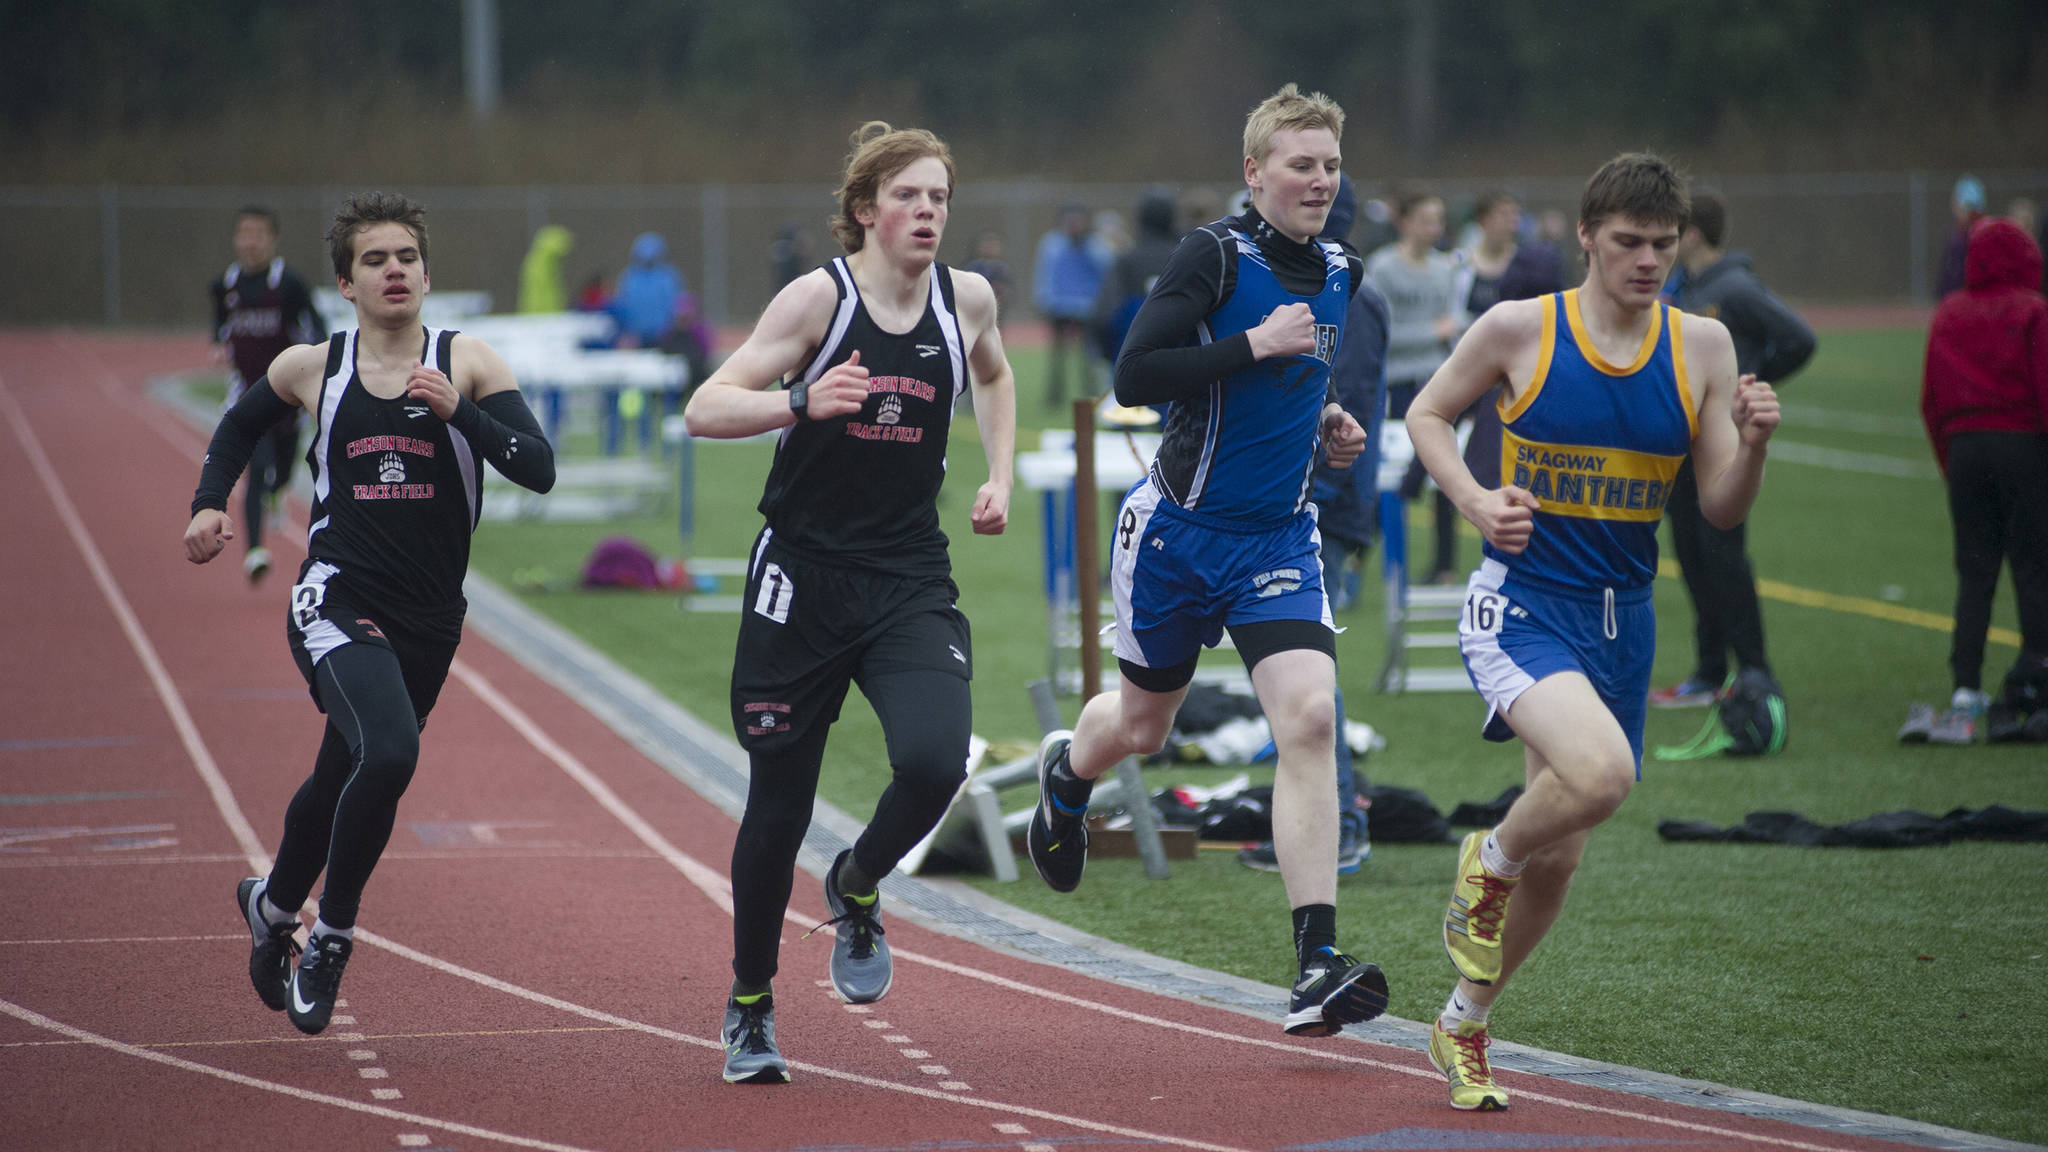 Juneau-Douglas’ Ethan Sellers, far right, Owen Squires and Thunder Mountain’s Sam Dobson round the second lap of the 800-meter preliminary race on Friday at the Capital Invitational track and field meet hosted by TMHS and JDHS. (Richard McGrail | Juneau Empire)